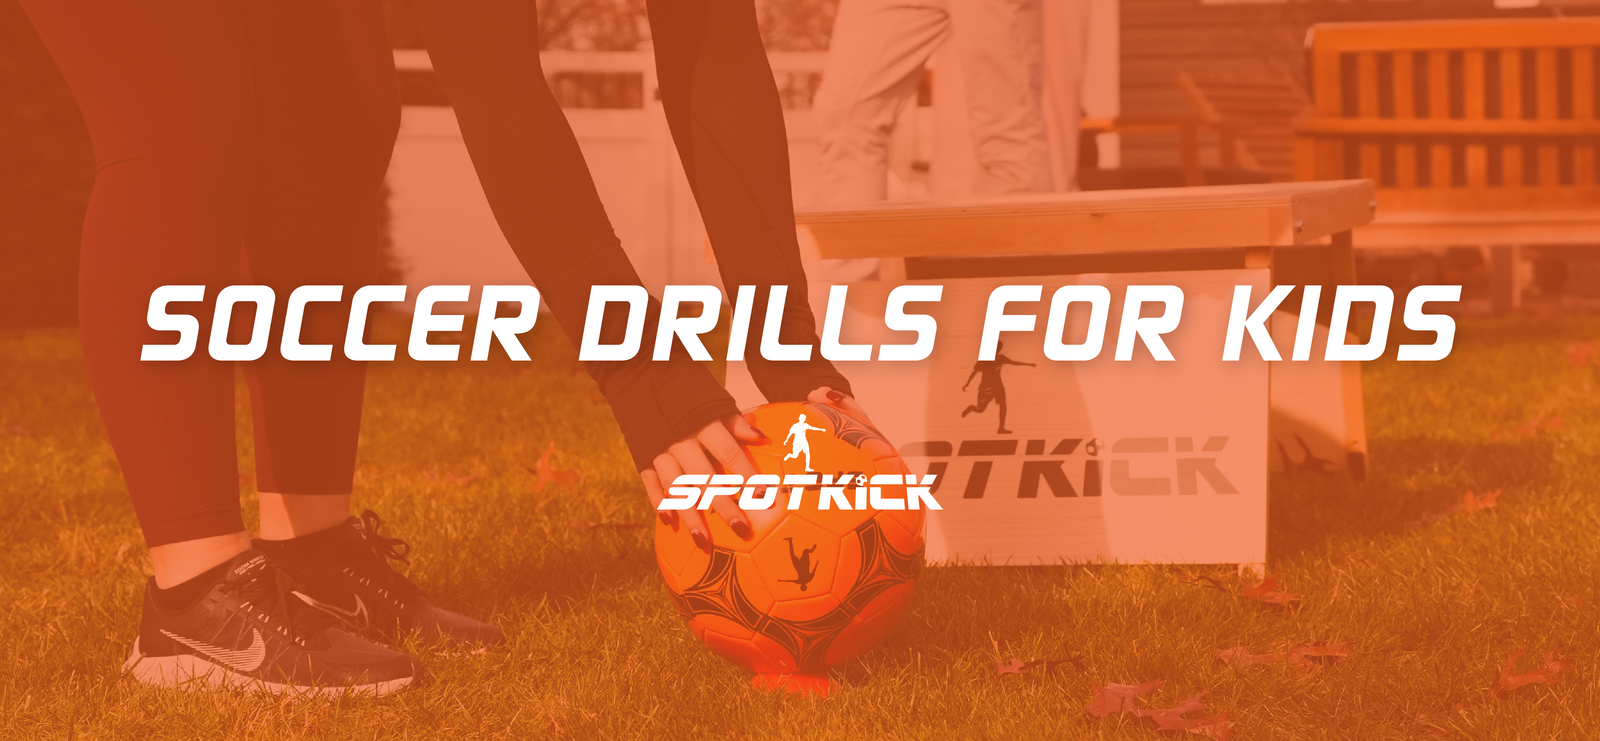 Soccer Drills For kids, soccer drills for 6 year olds